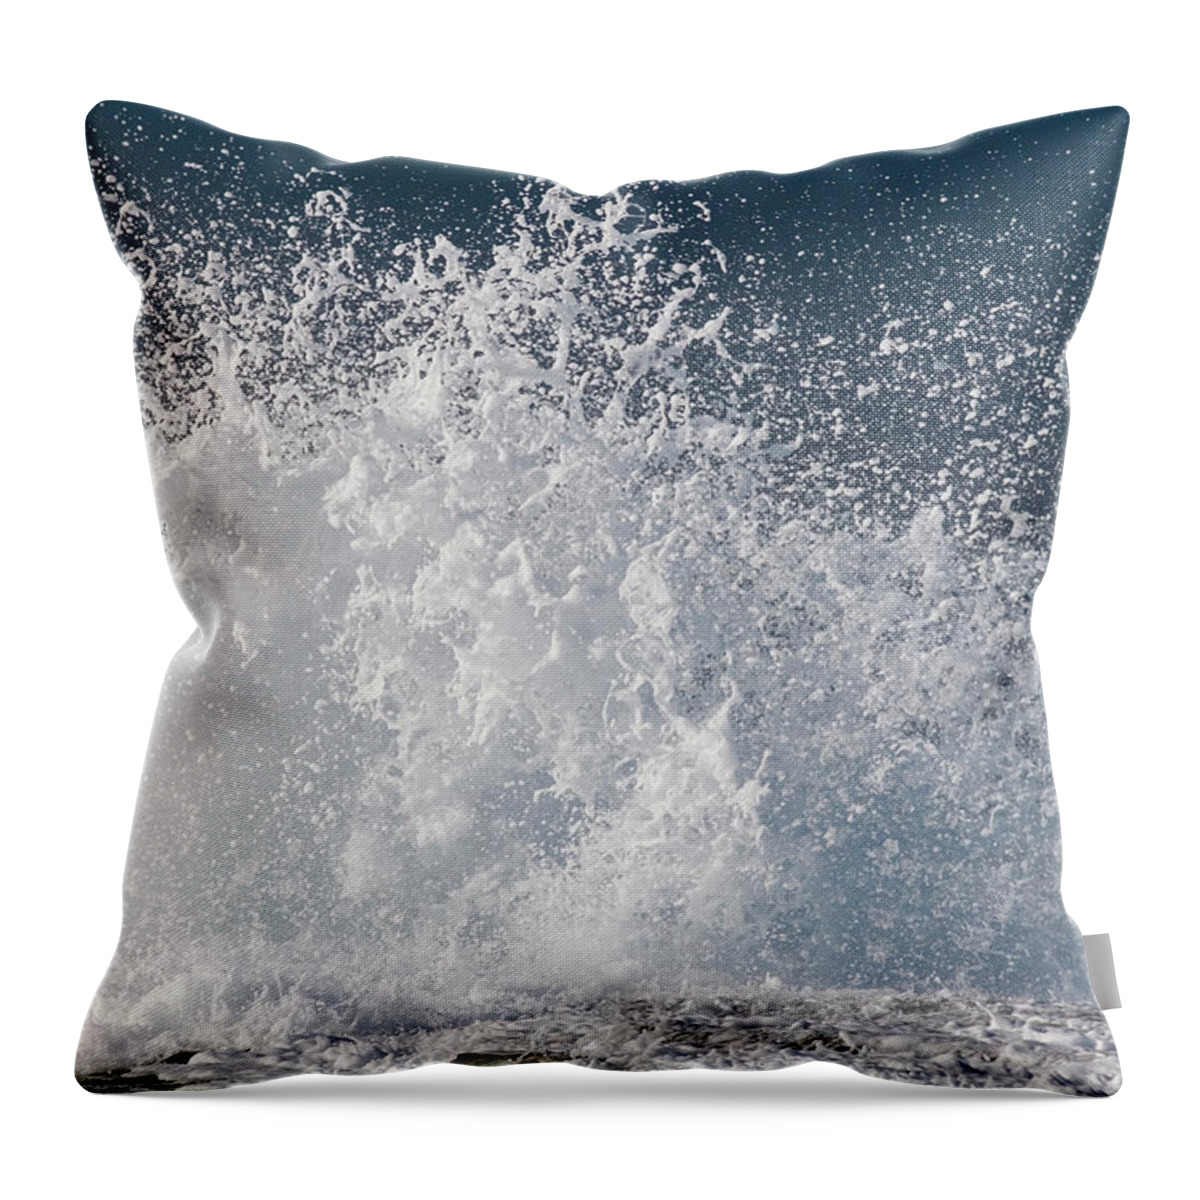 Spray Throw Pillow featuring the photograph Wave Splash by Hanis